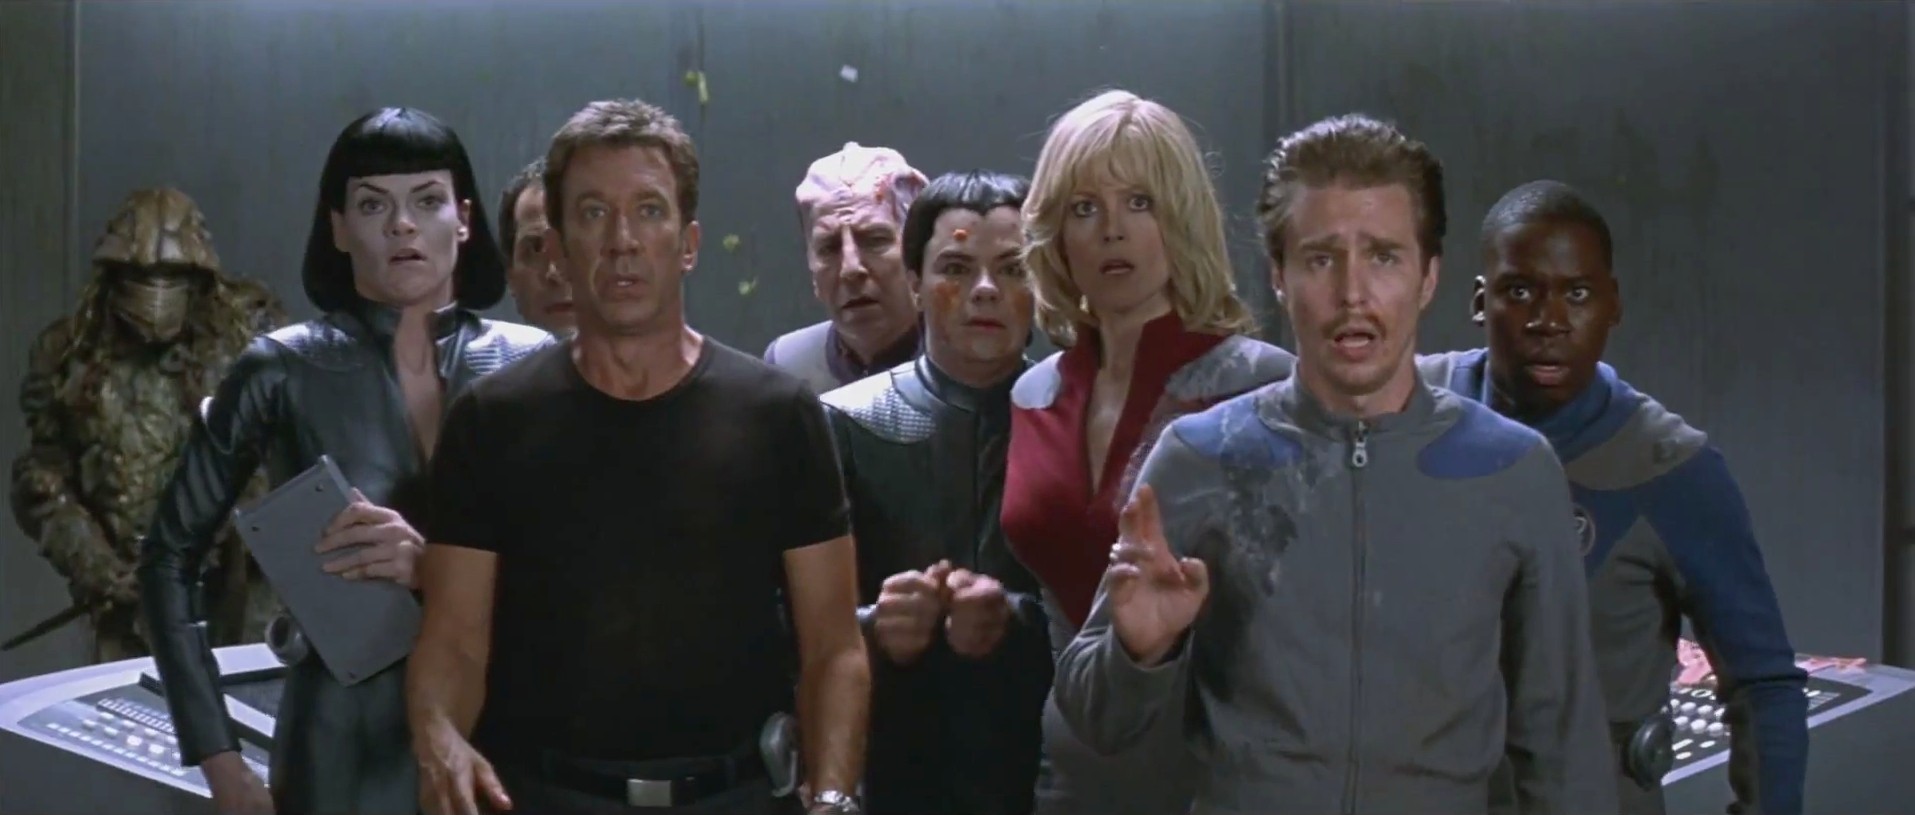 Nice Images Collection: Galaxy Quest Desktop Wallpapers